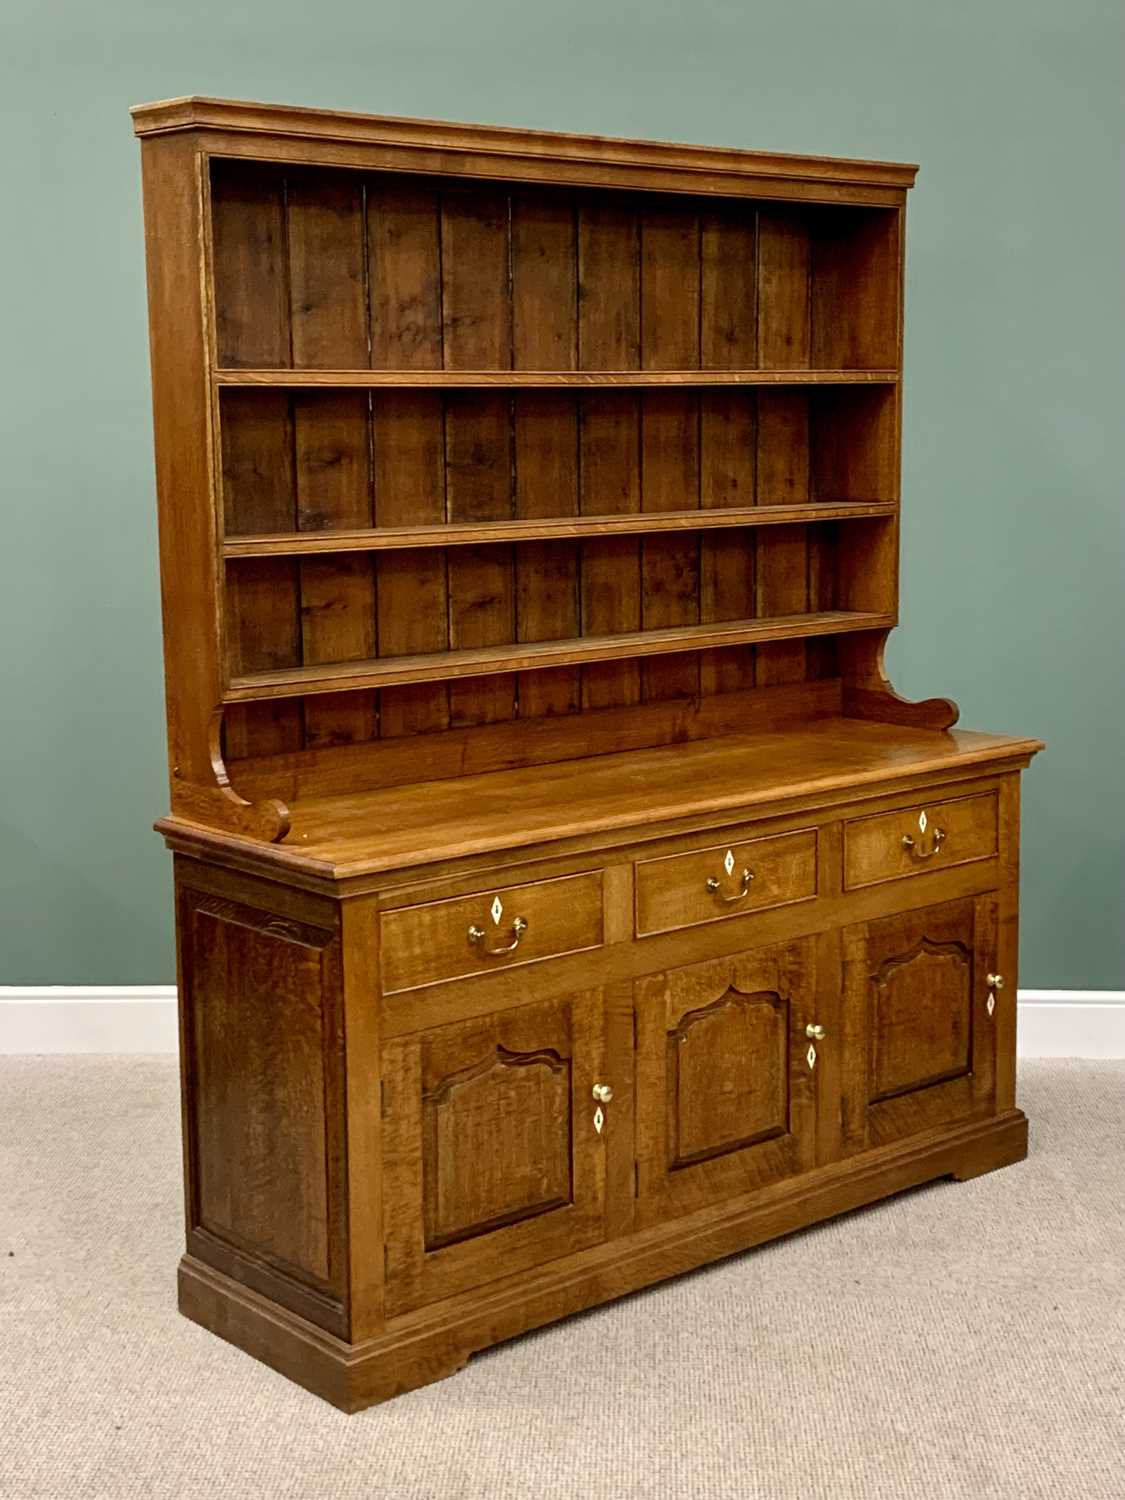 OAK WELSH DRESSER - 20th Century, the boarded plate rack back with three shelves, the base having - Image 2 of 4